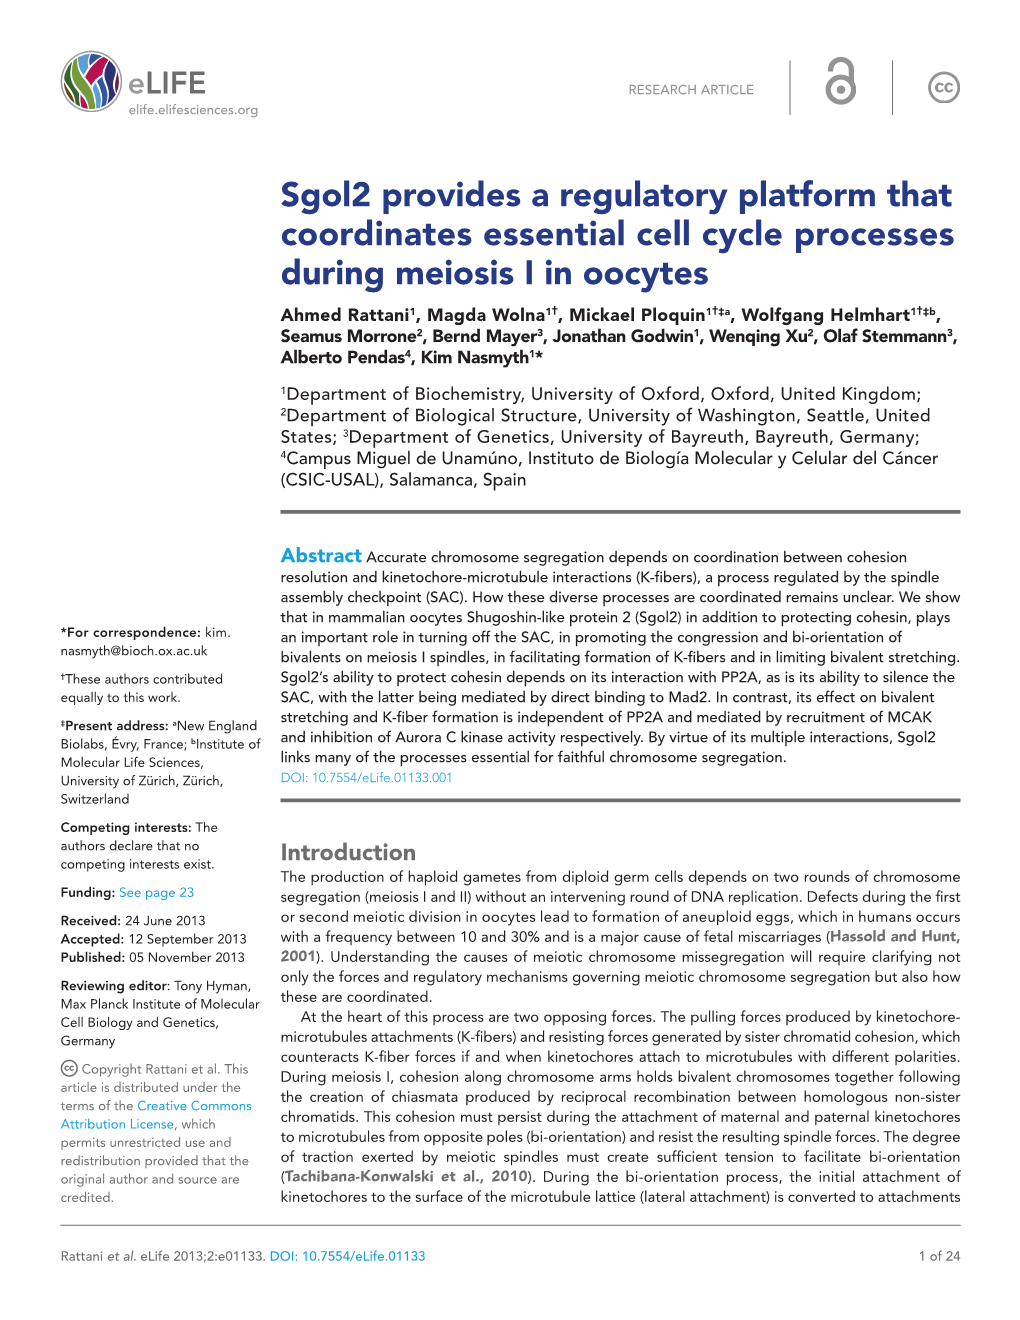 Sgol2 Provides a Regulatory Platform That Coordinates Essential Cell Cycle